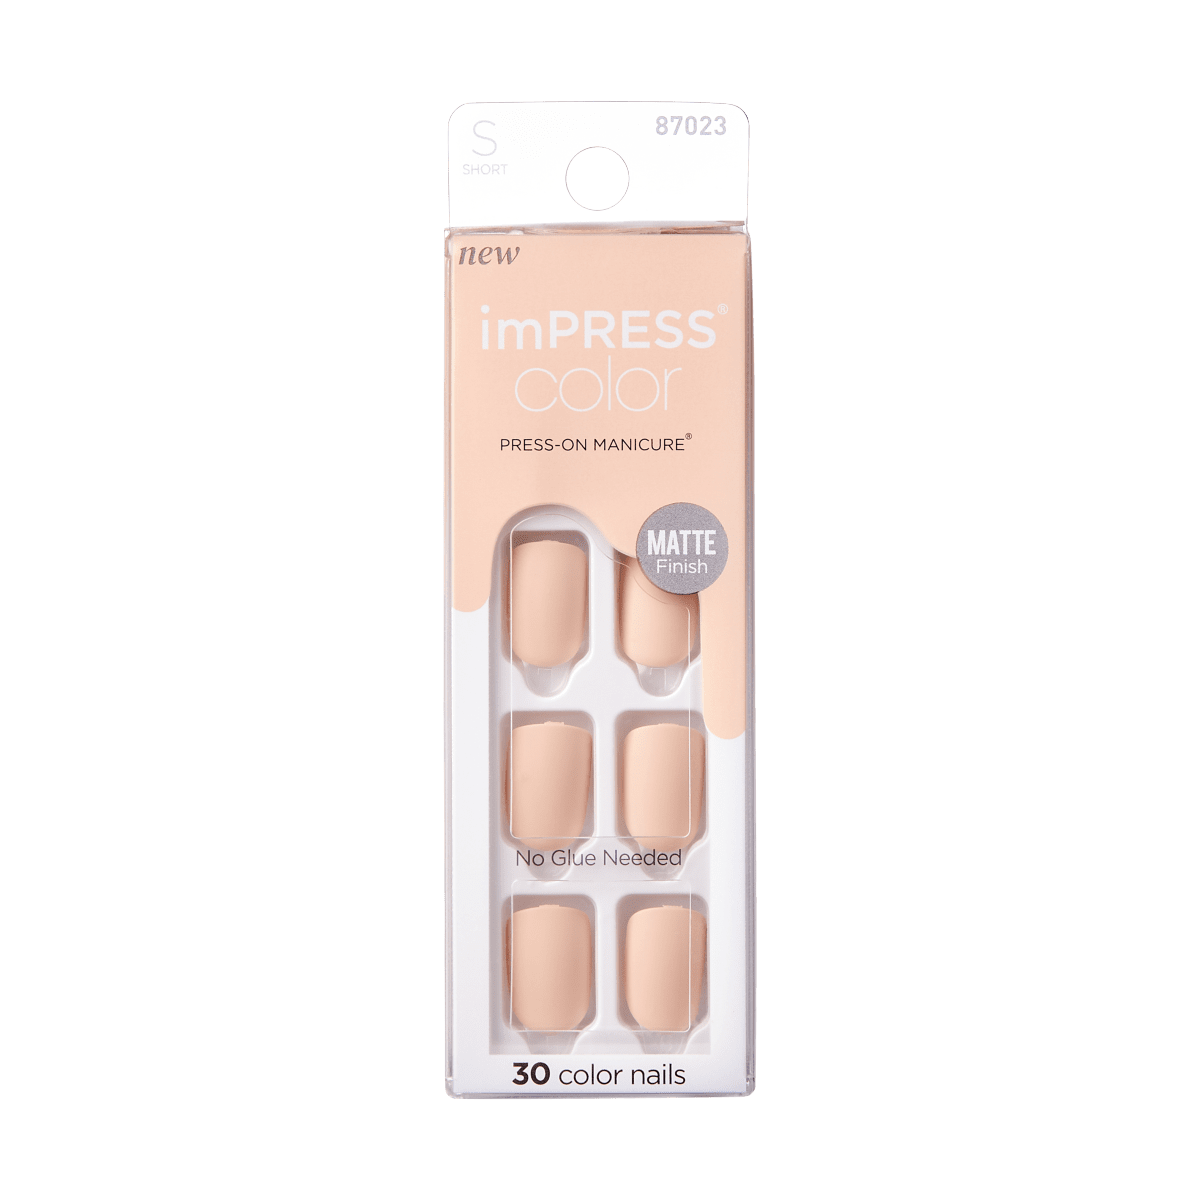 imPRESS Color Press-On Manicure Matte- Perfect Timing